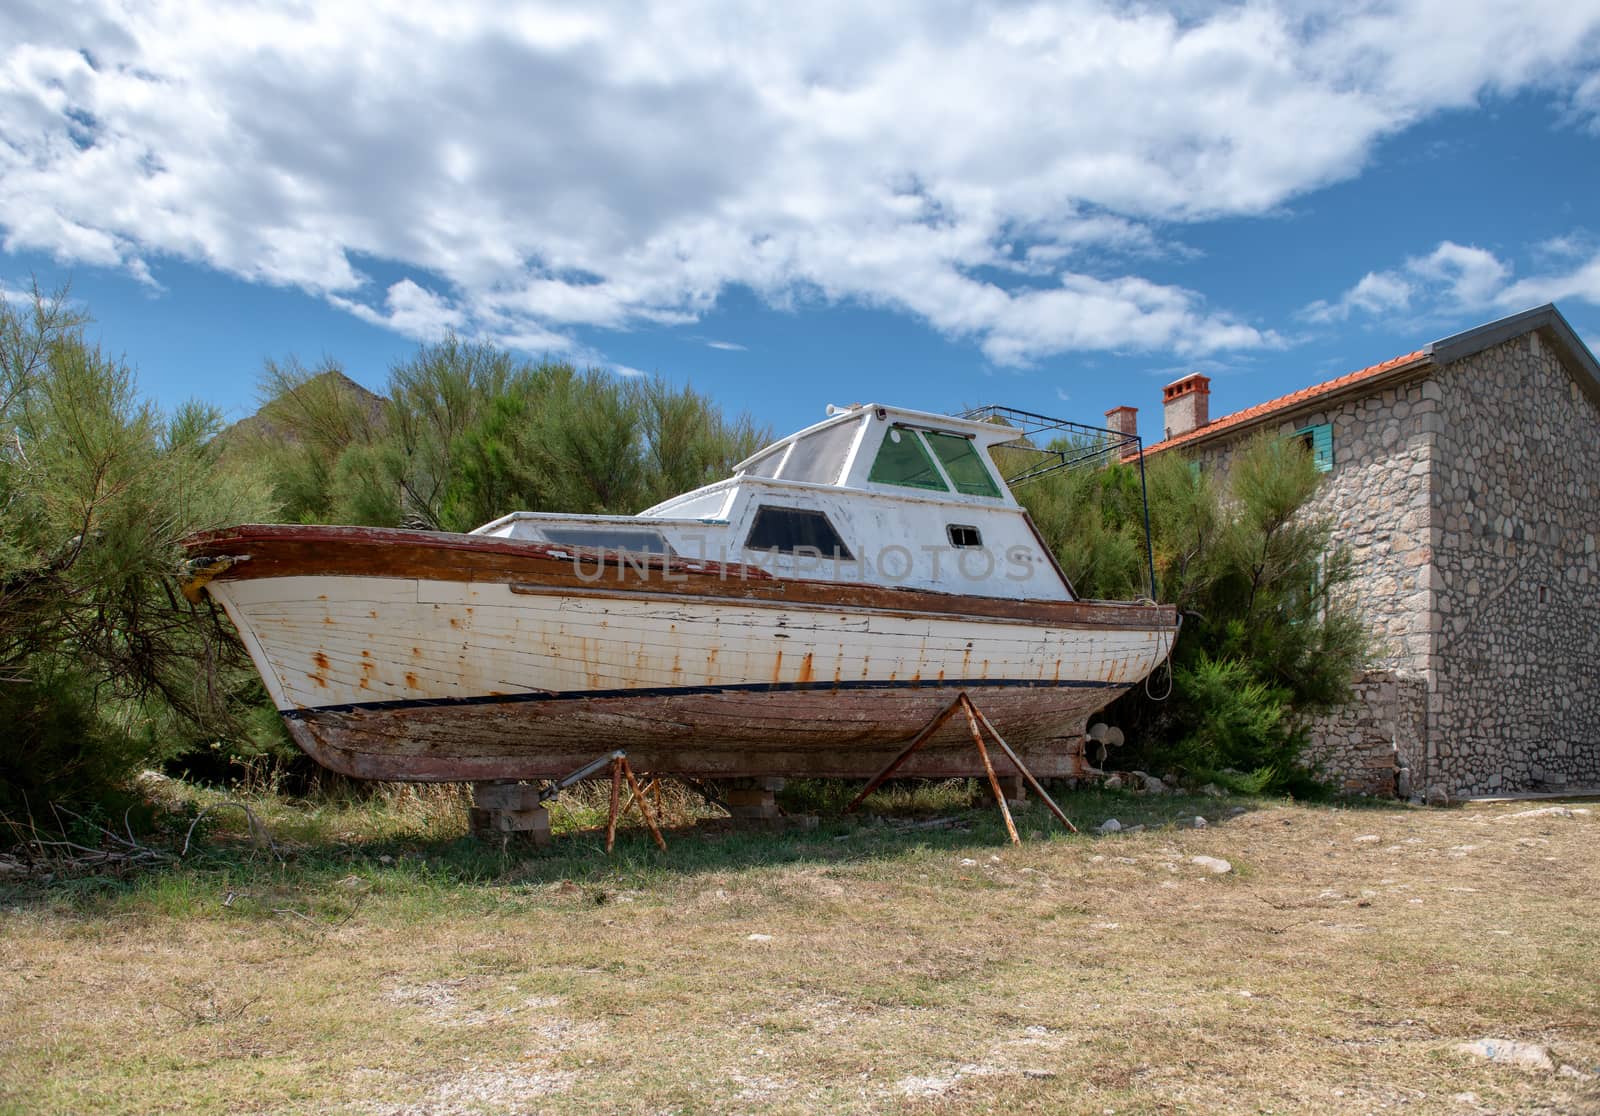 Abandoned boat on shore stone house in background by asafaric